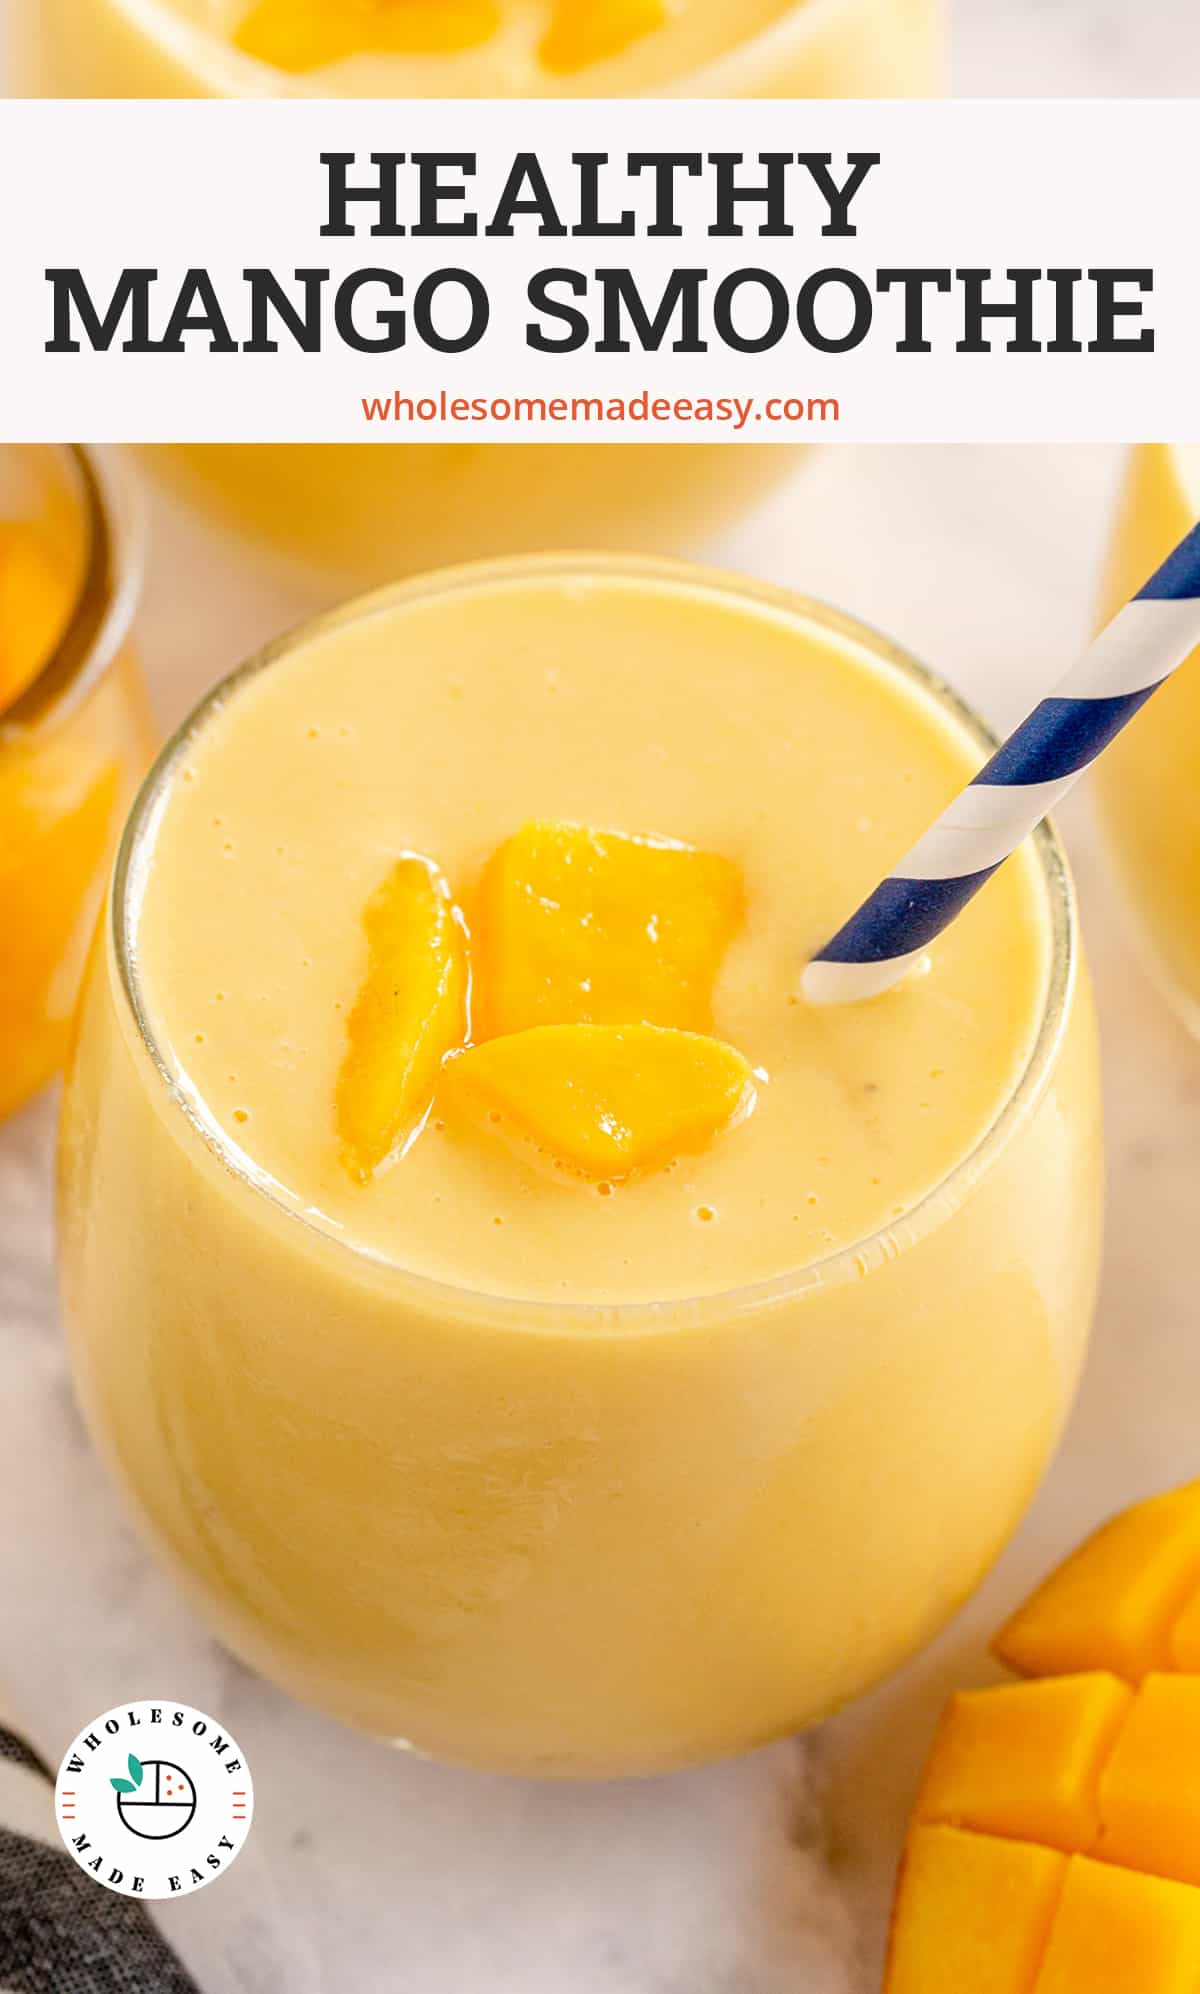 An angled over the top shot of a mango smoothie with a blue straw with text overlay.